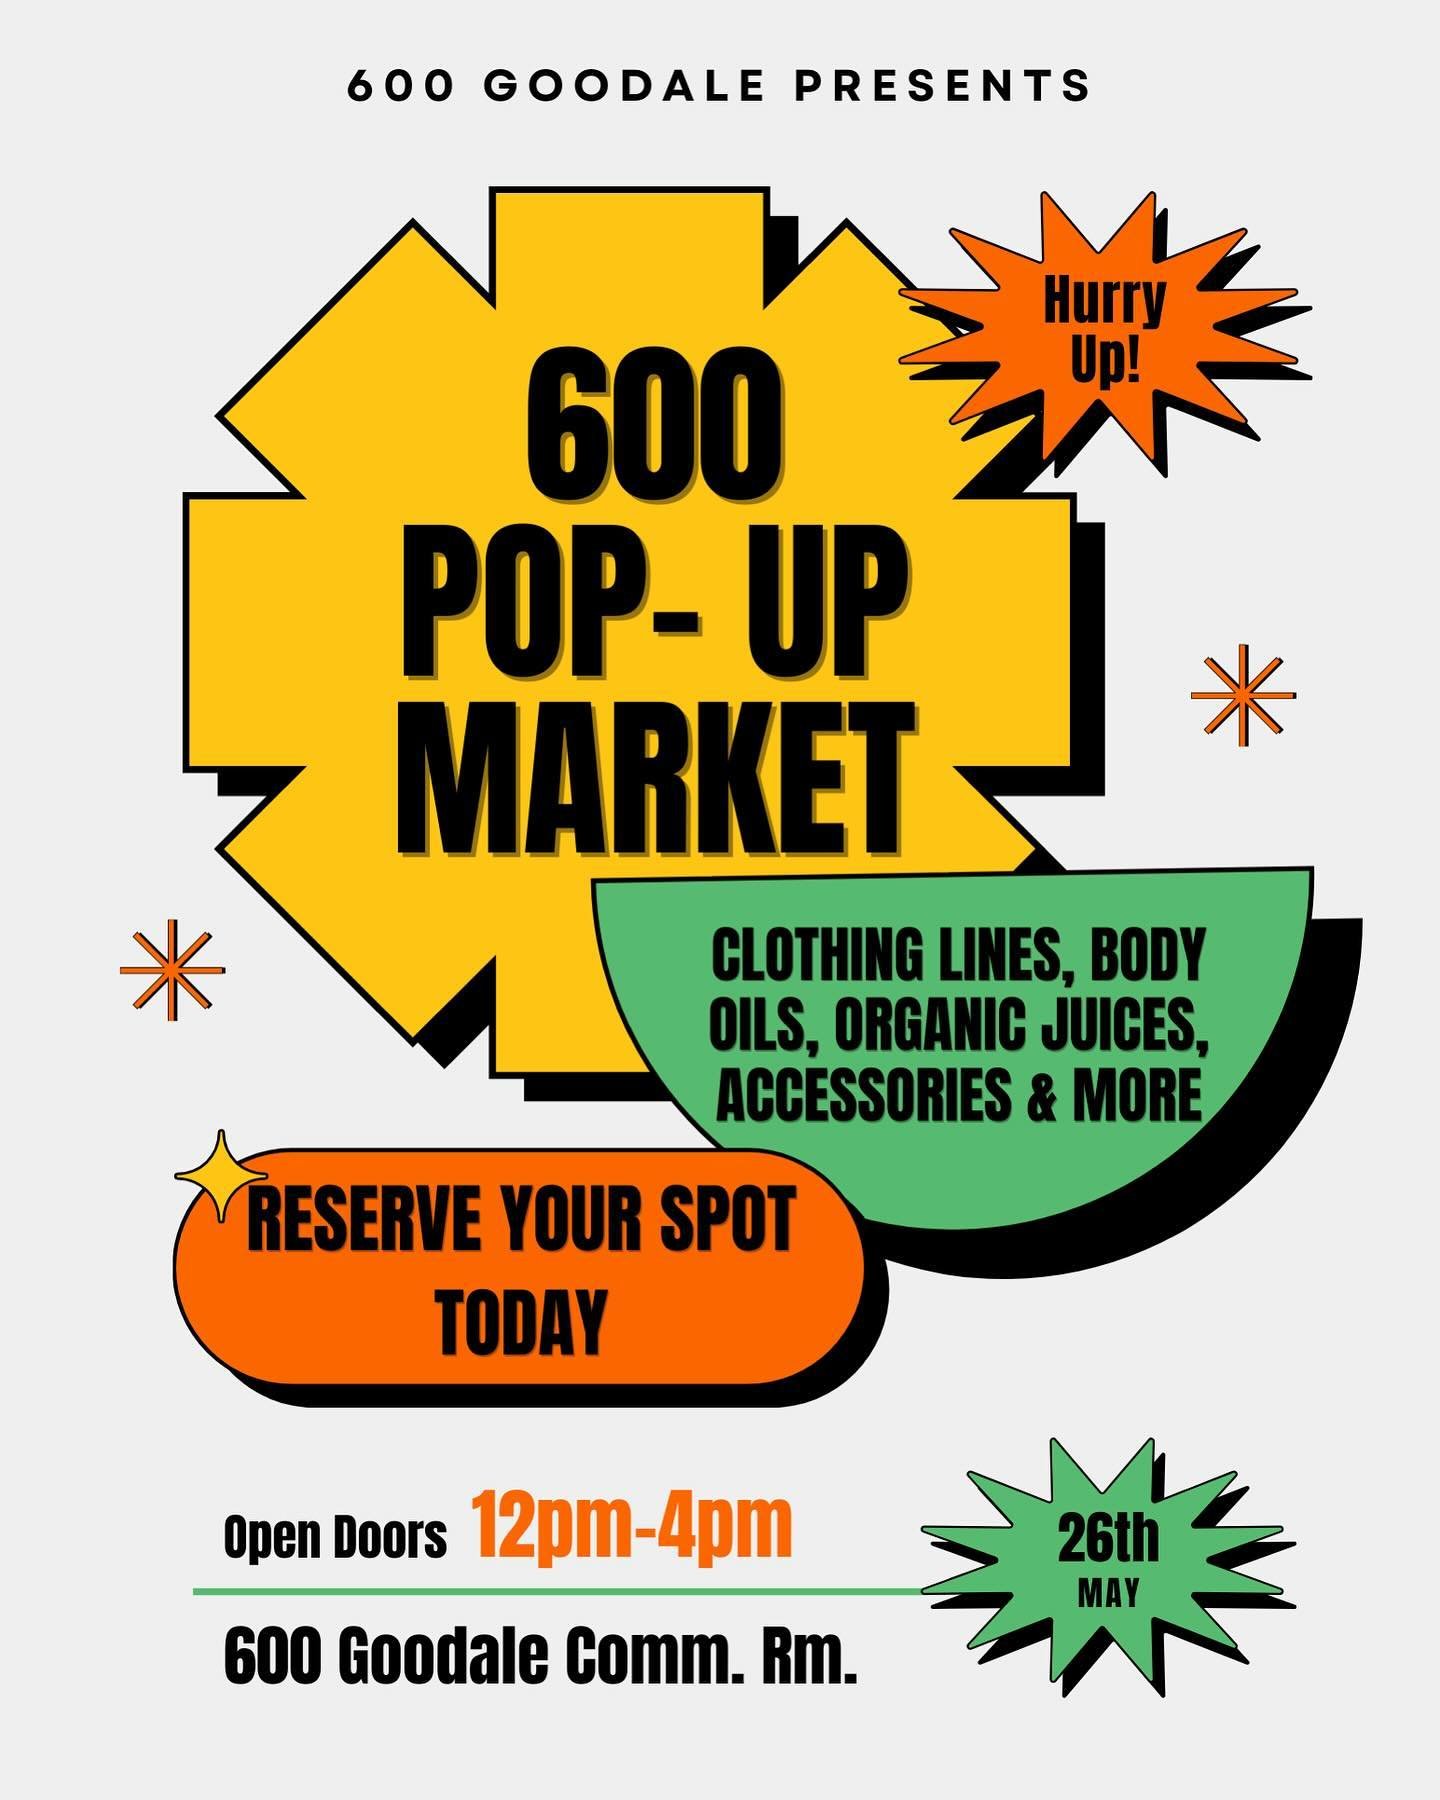 Hello 600 Goodale Followers!! We are doing something different this upcoming month!! We are setting up for a big Pop Up Shop at the end of May! If you have a business that you would like to be apart then let us know and we can get a table reserved fo